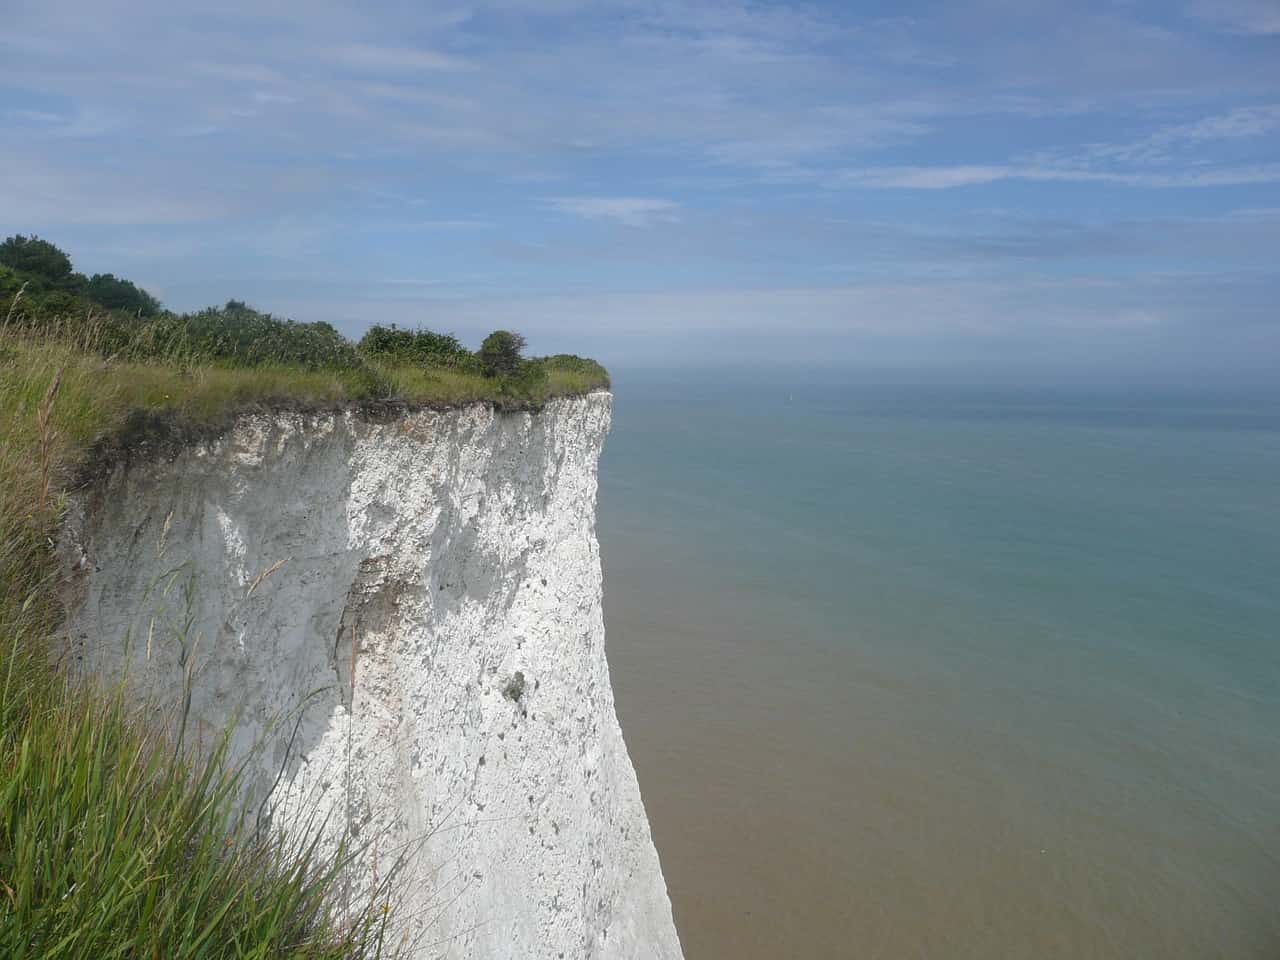 The famous White Cliffs of Dover: the tallest white cliffs in England